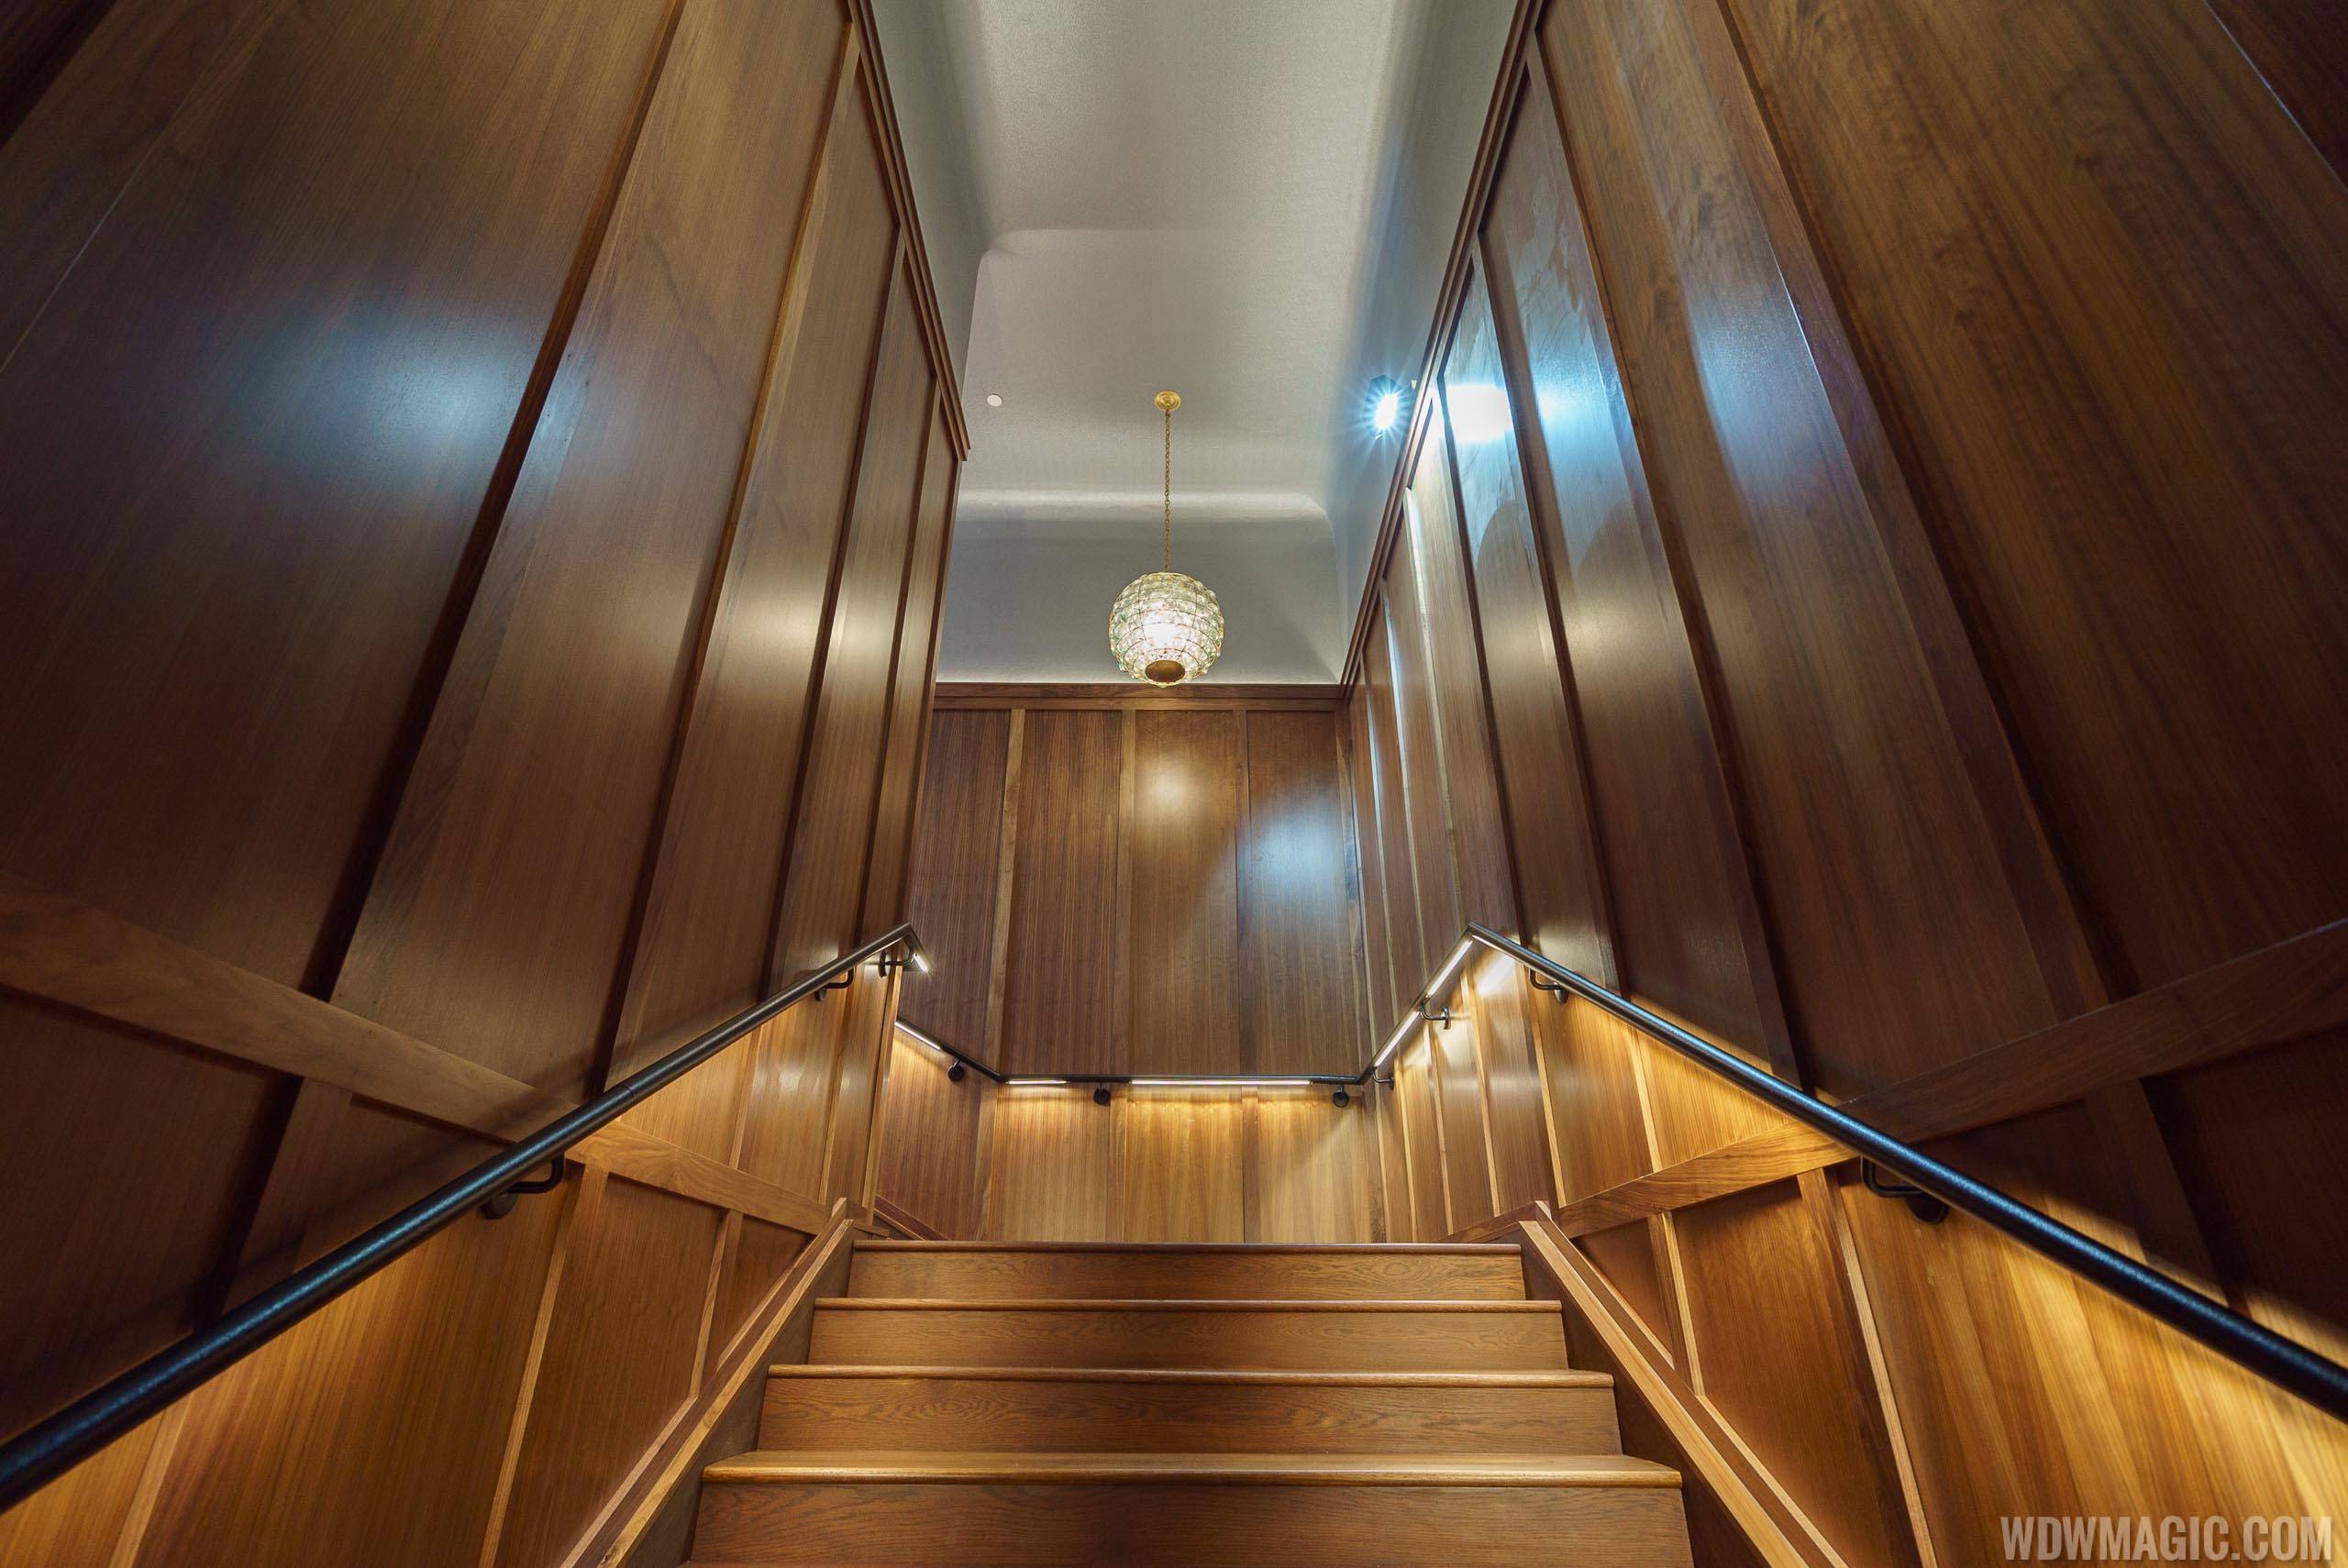 Paddlefish - Interior staircase between levels